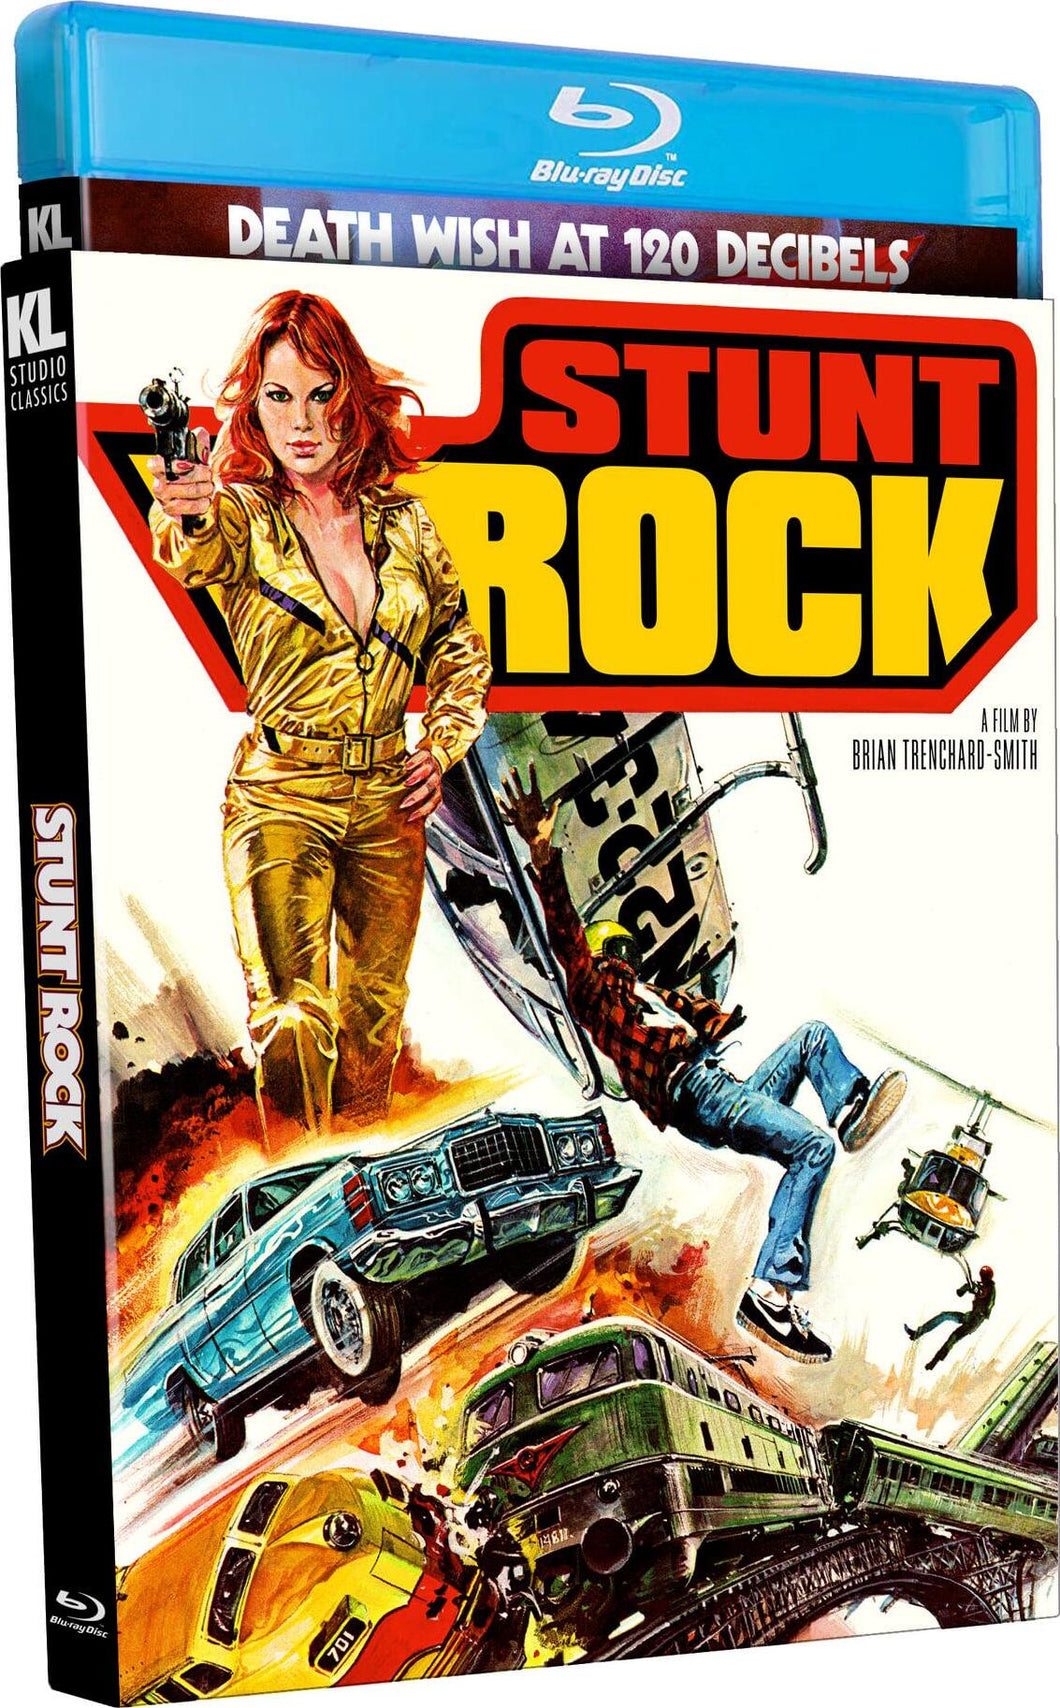 Stunt Rock (1979) de Brian Trenchard-Smith - front cover